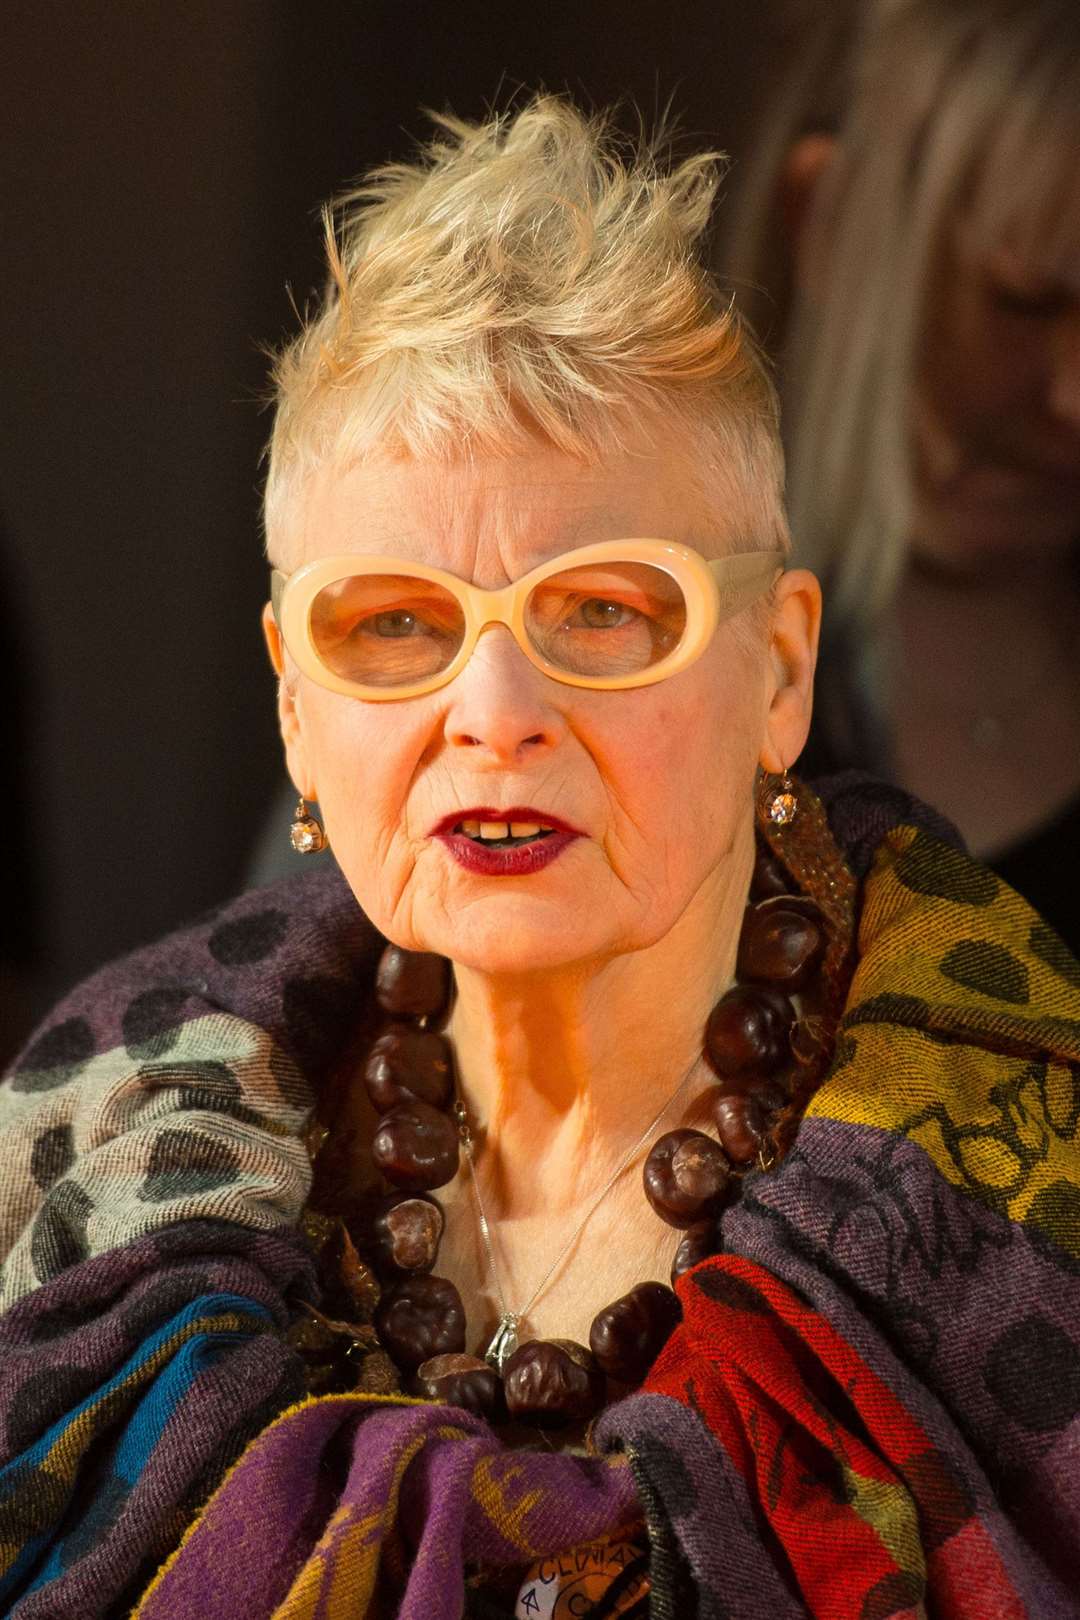 Dame Vivienne Westwood watches a London Fashion Week rehearsal backstage in 2015 (Dominic Lipinski/PA)